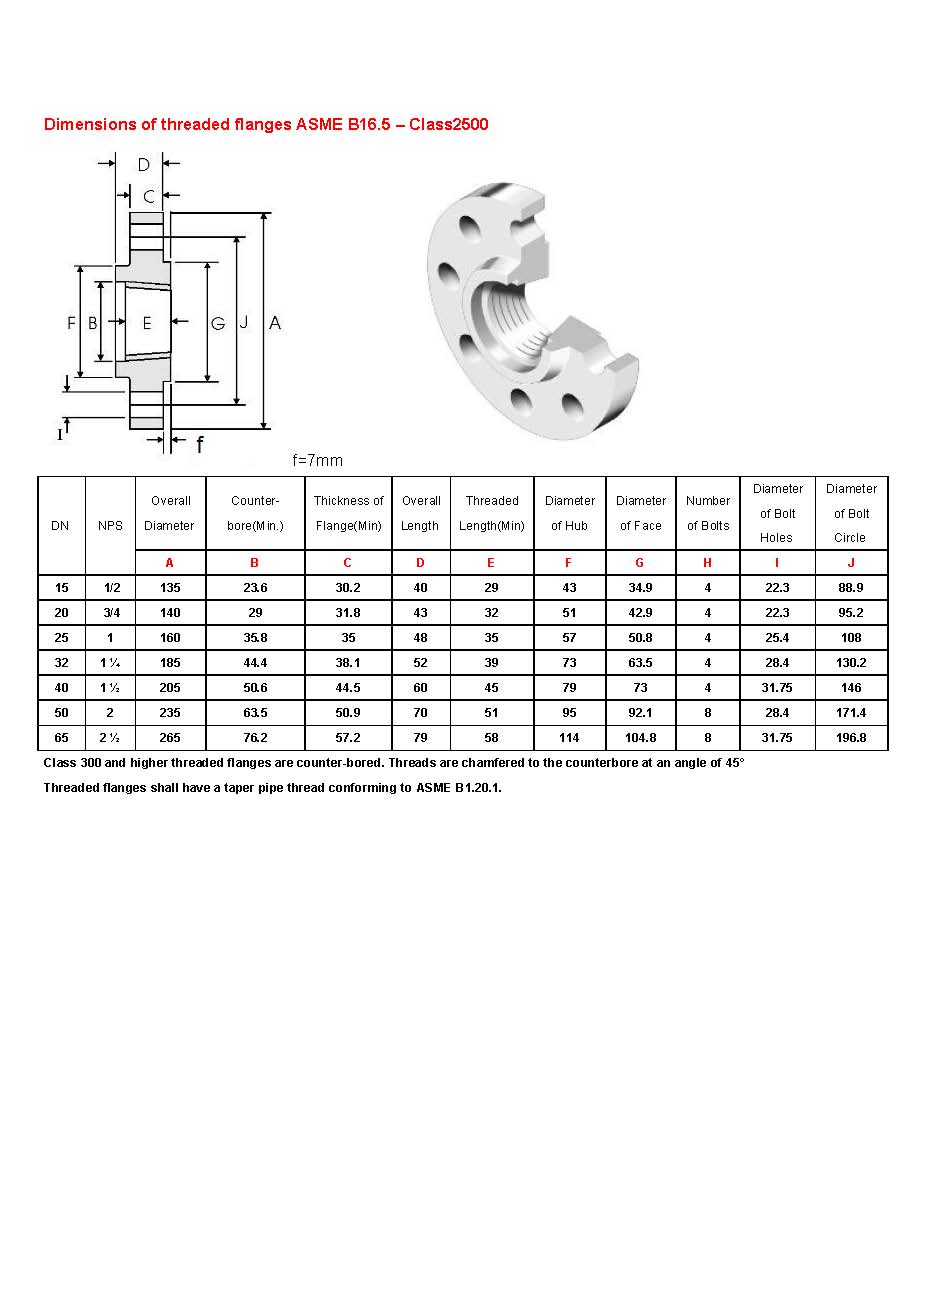 Dimensions of threaded flanges ASME B16.5 class2500